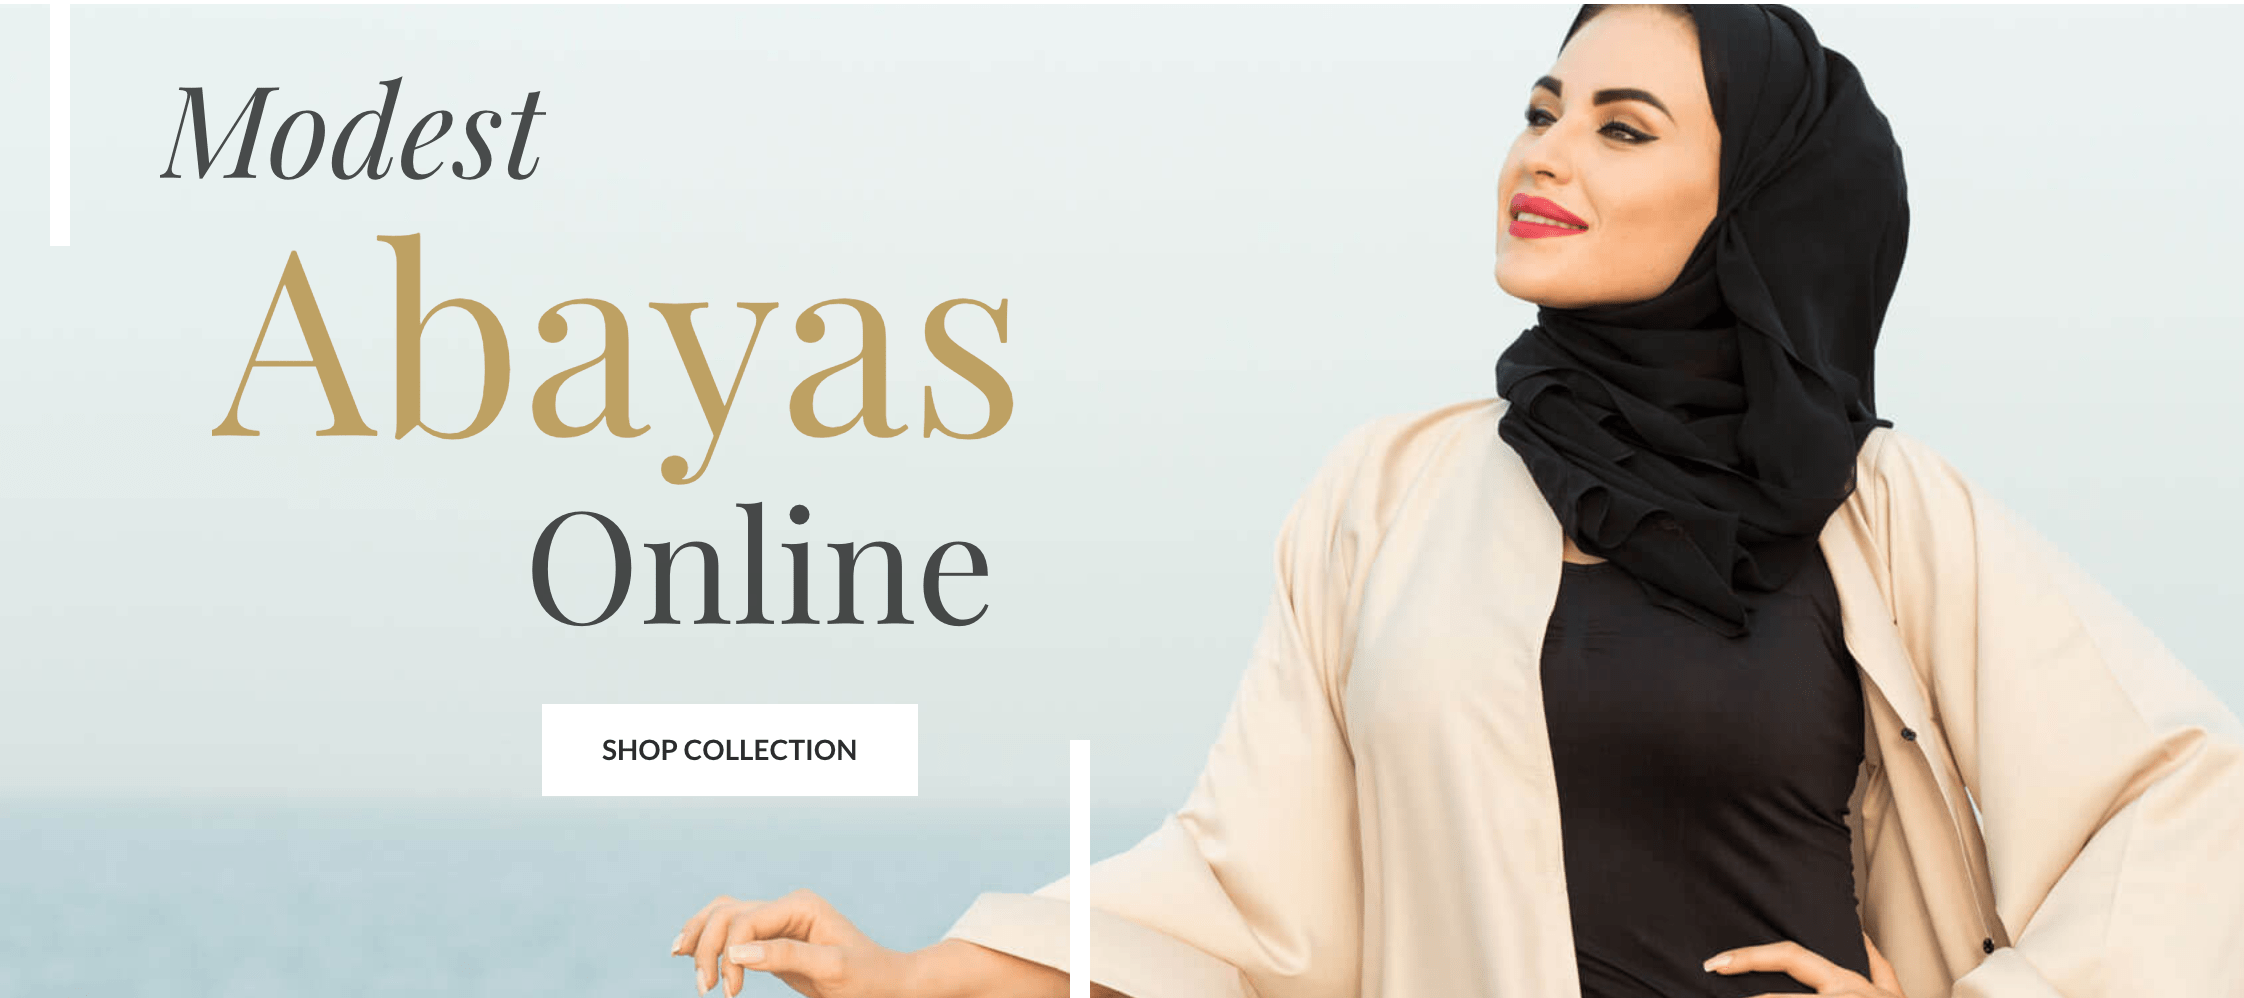 Buy Abayas Online From Miss Abaya and Get 10% Discount with Free Delivery